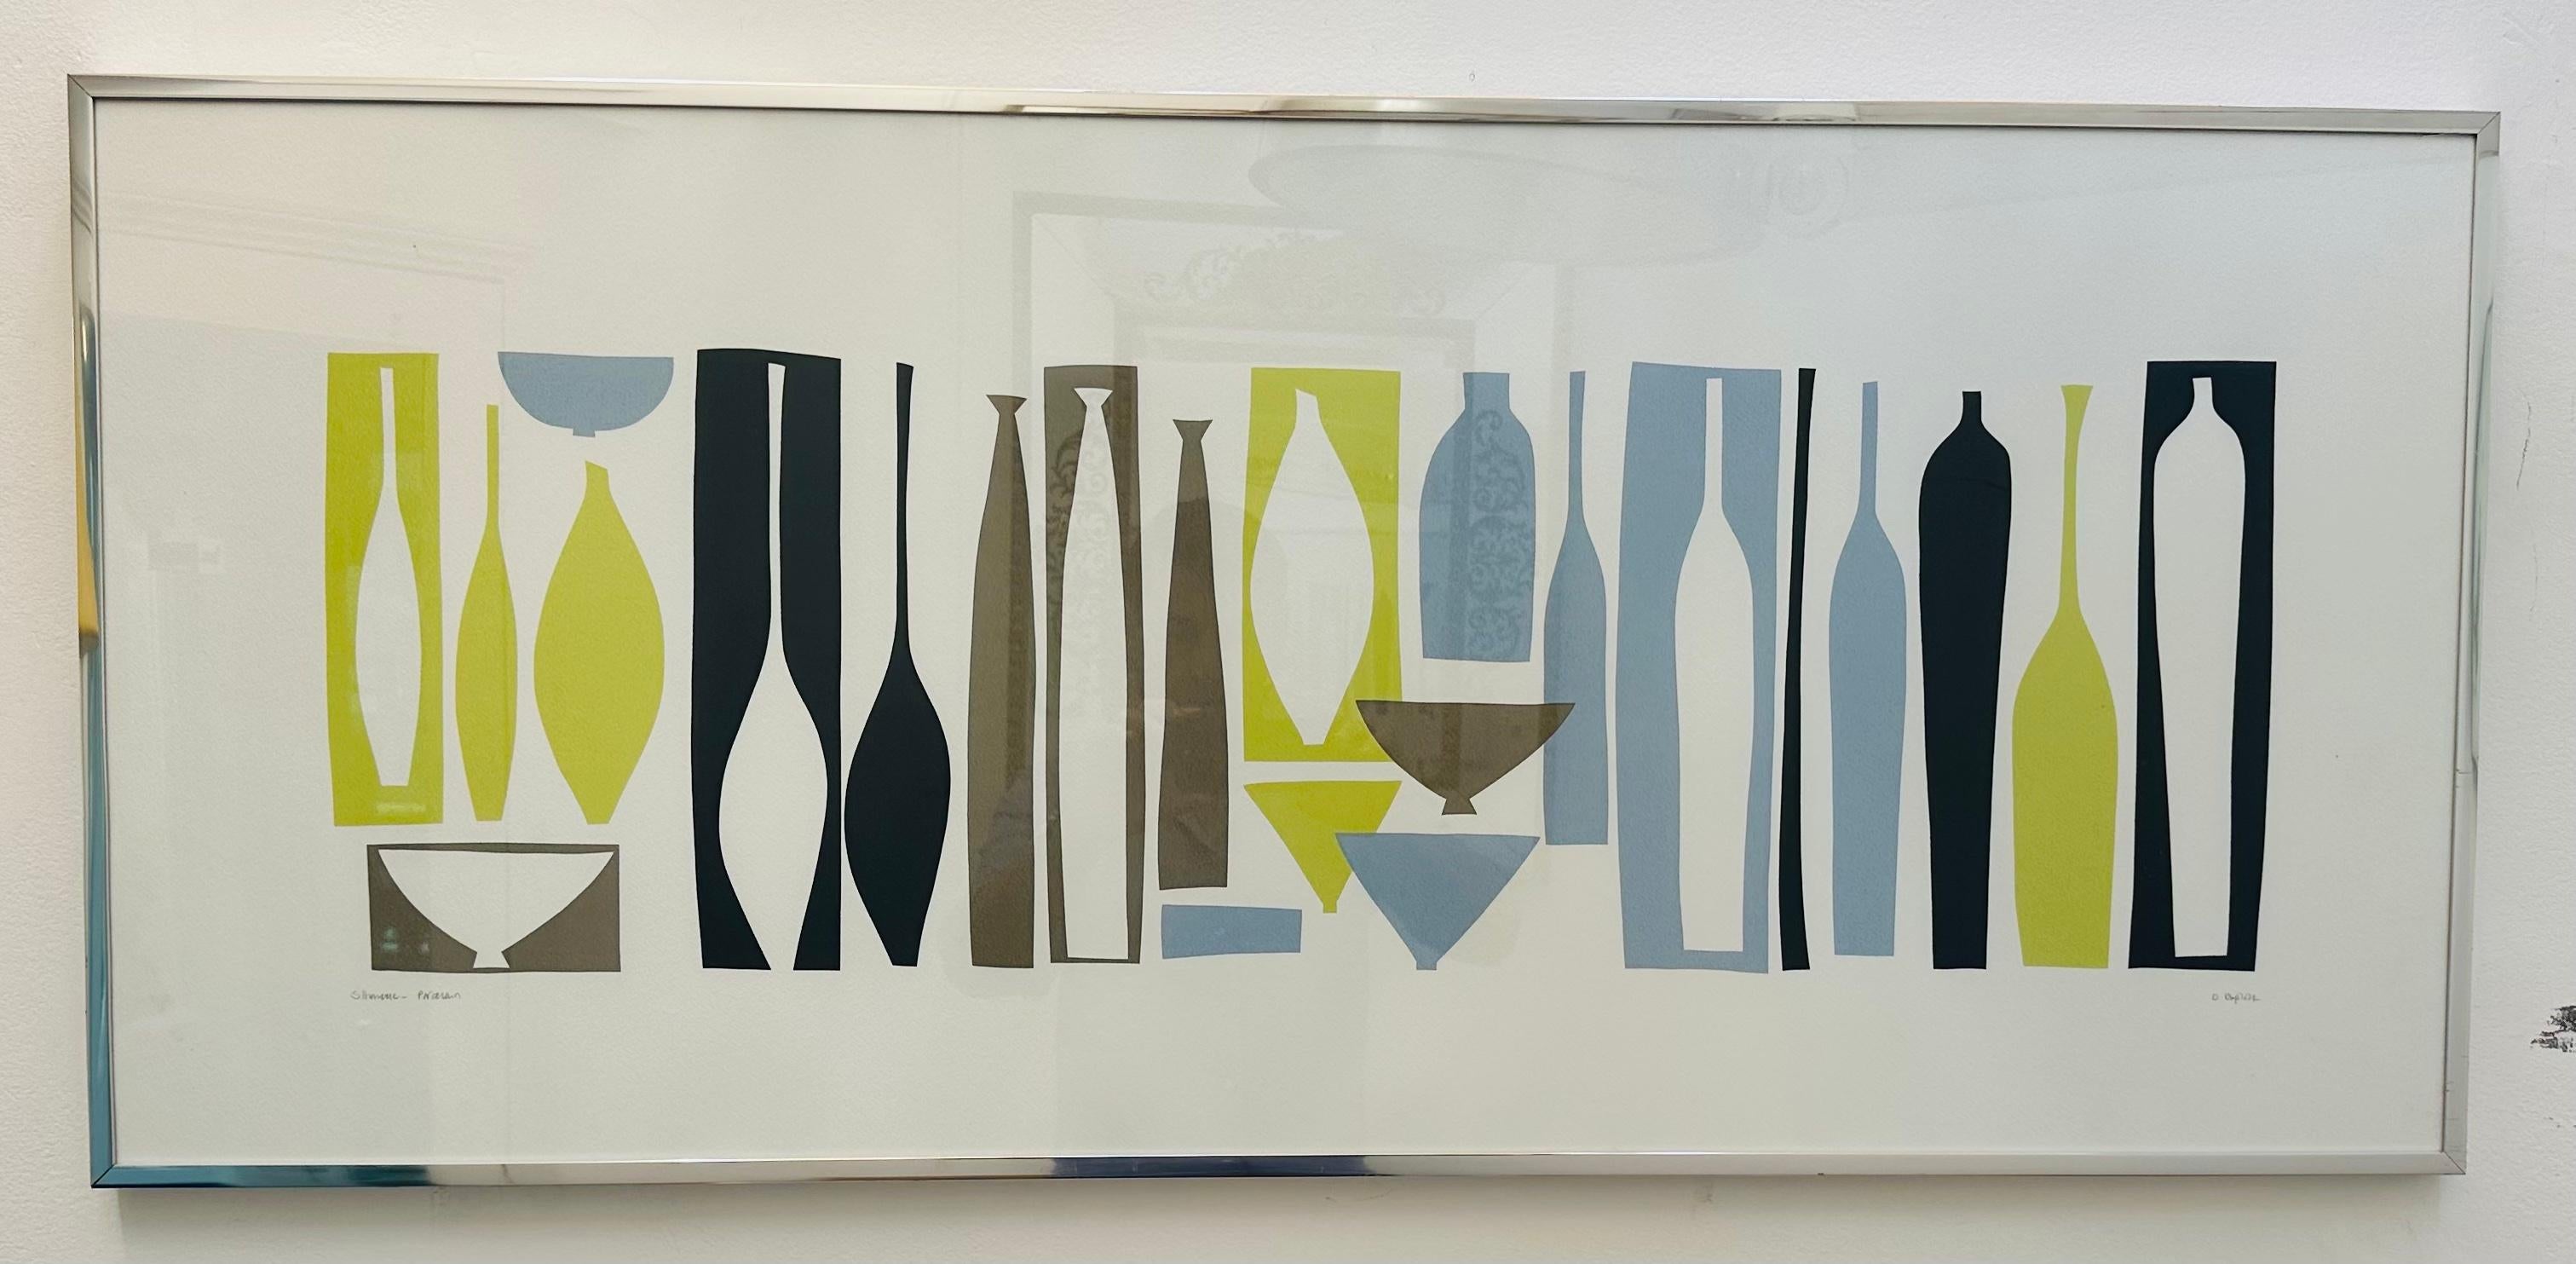 A signed silkscreen print named Silhouette by Denise Duplock.  On the left it's signed with the name of the piece and on the right the artist's signature - D. Duplock. The piece shows the 